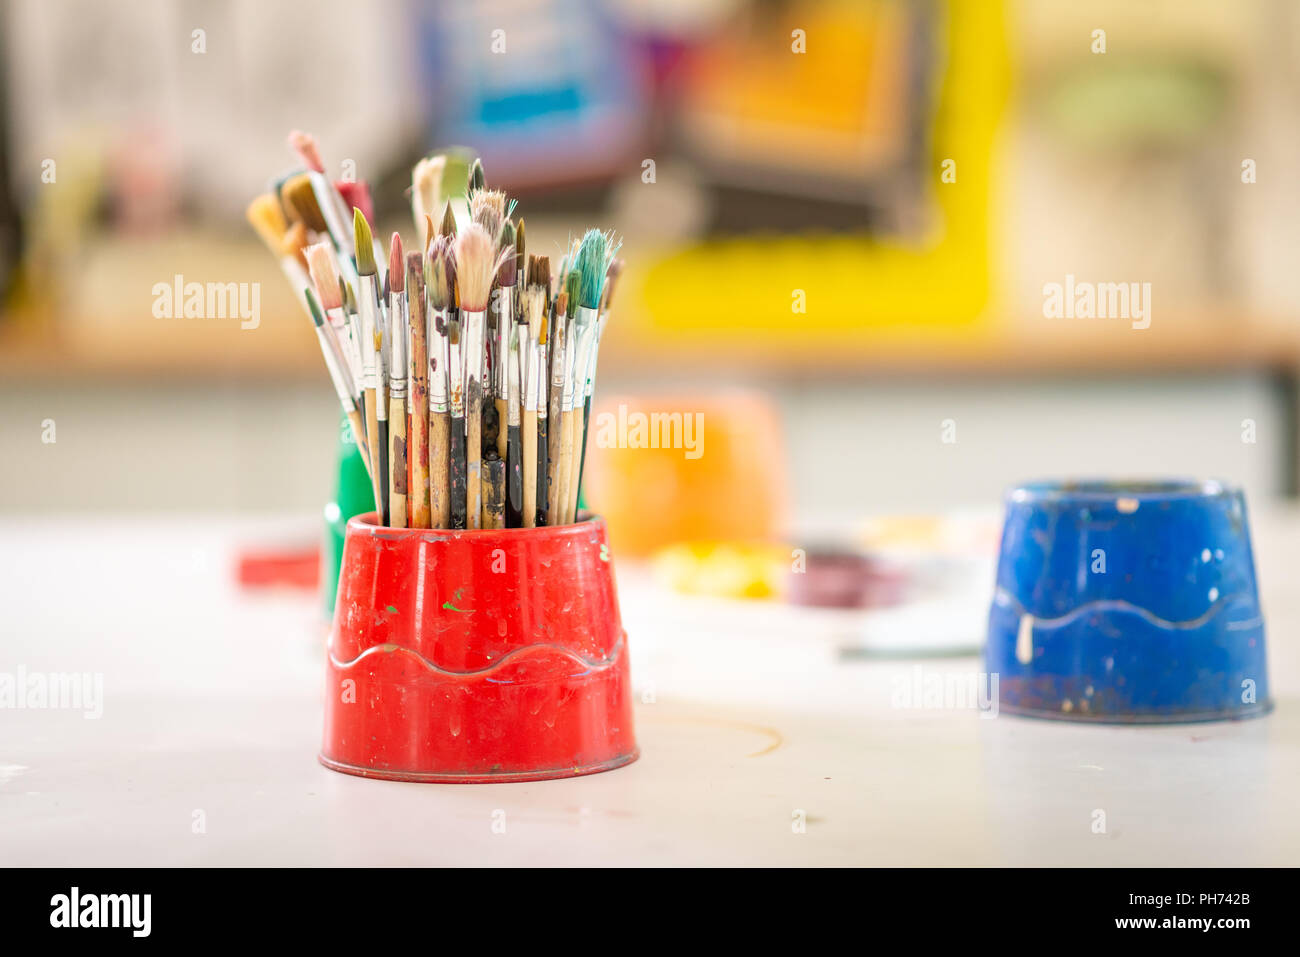 Pots of artist's used paint brushes on a school desk photographed in the art classroom Stock Photo